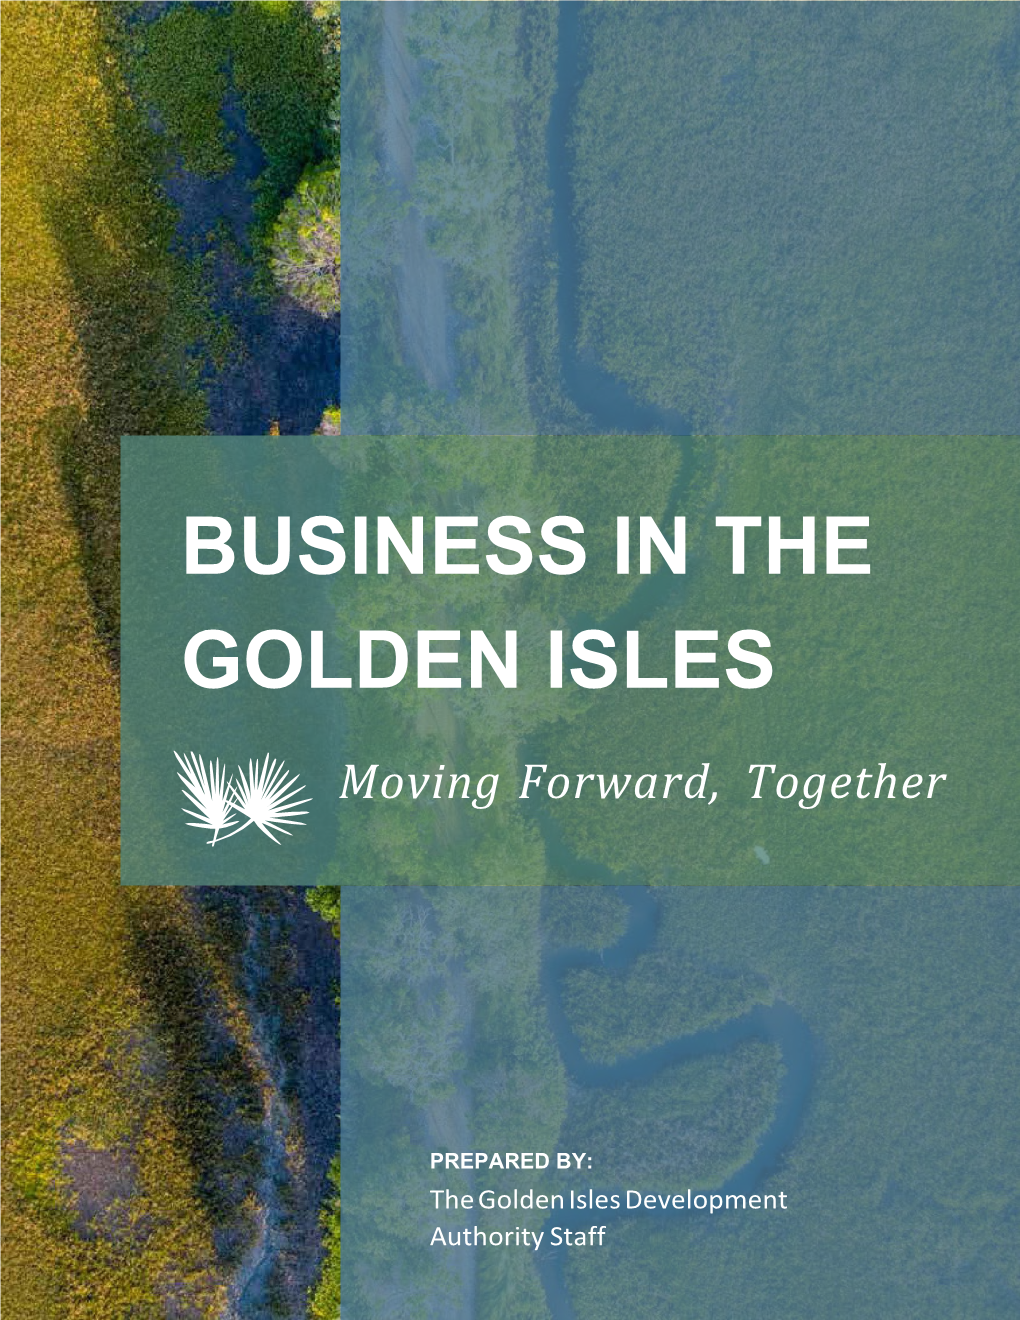 BUSINESS in the GOLDEN ISLES Moving Forward, Together